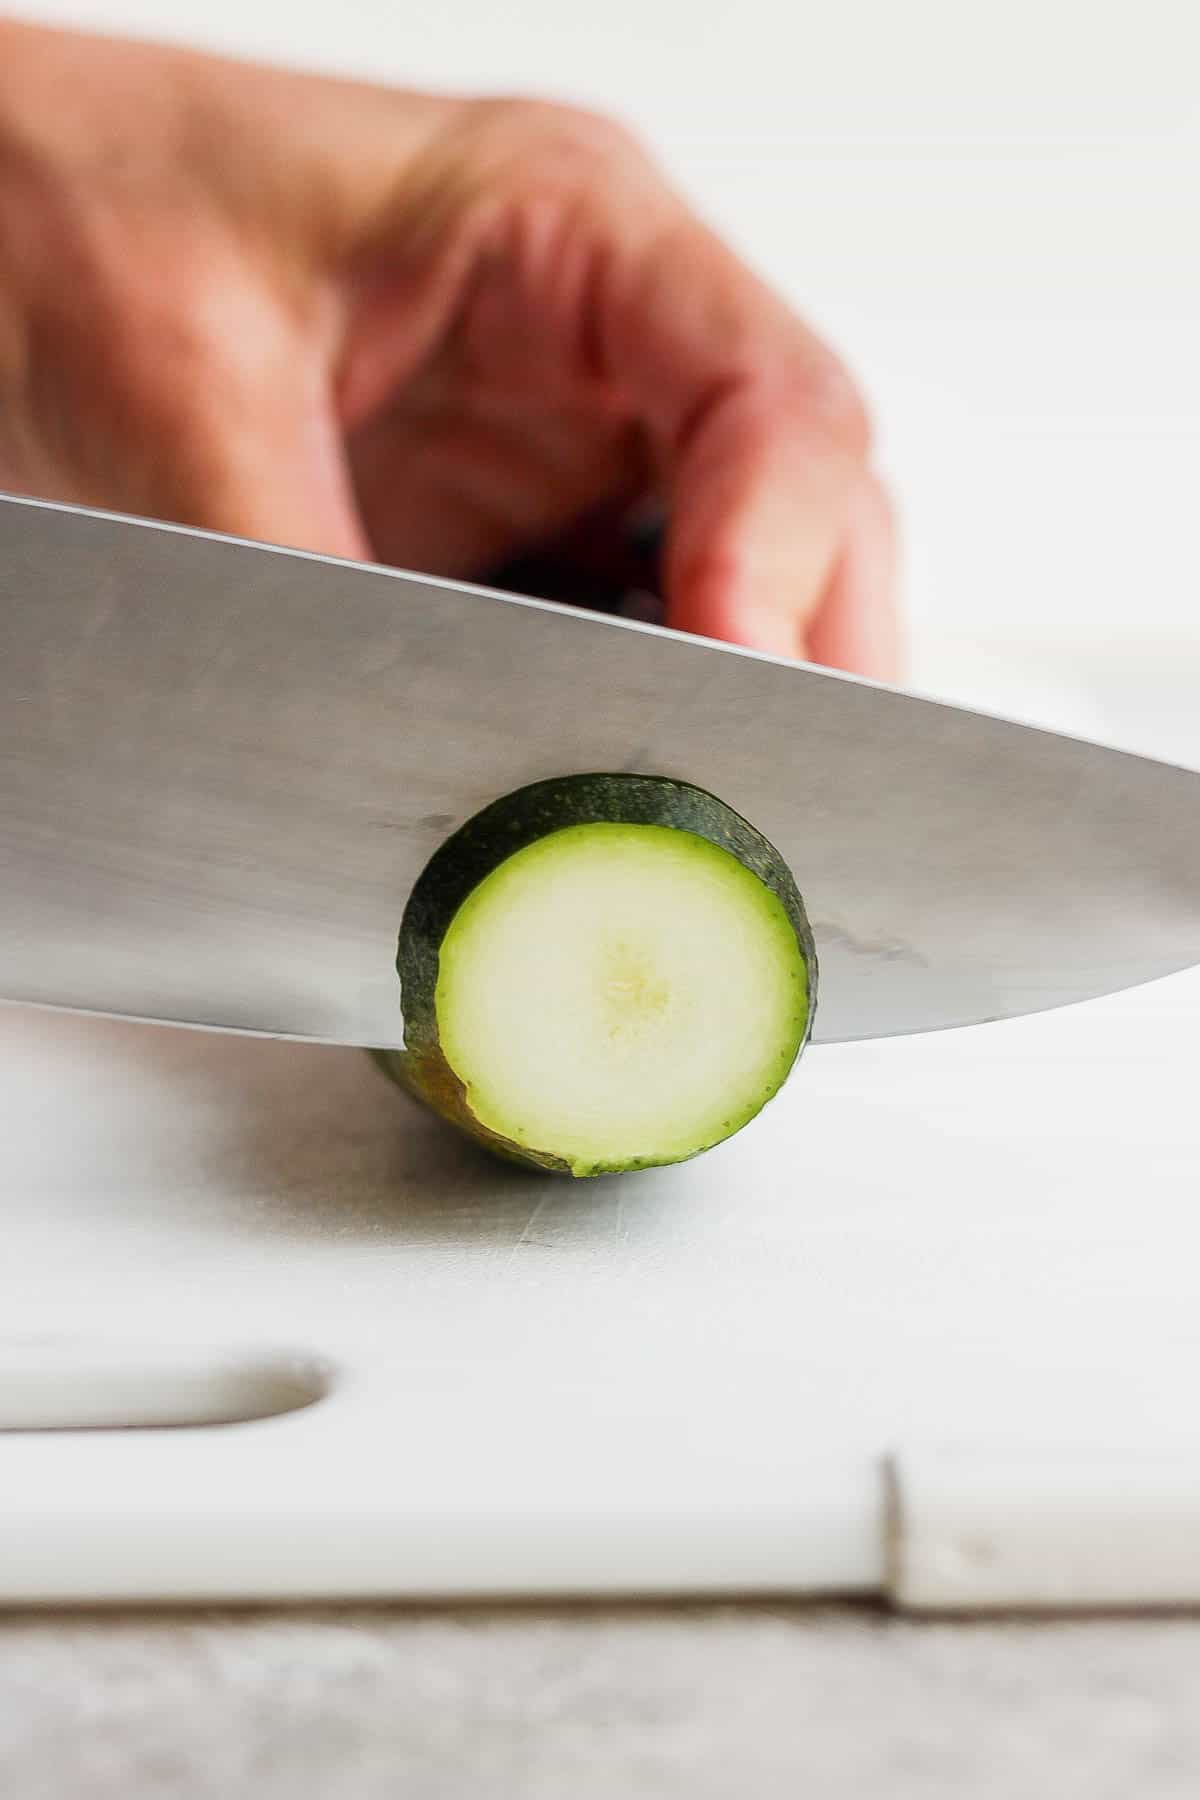 Zucchini being cut into slices.